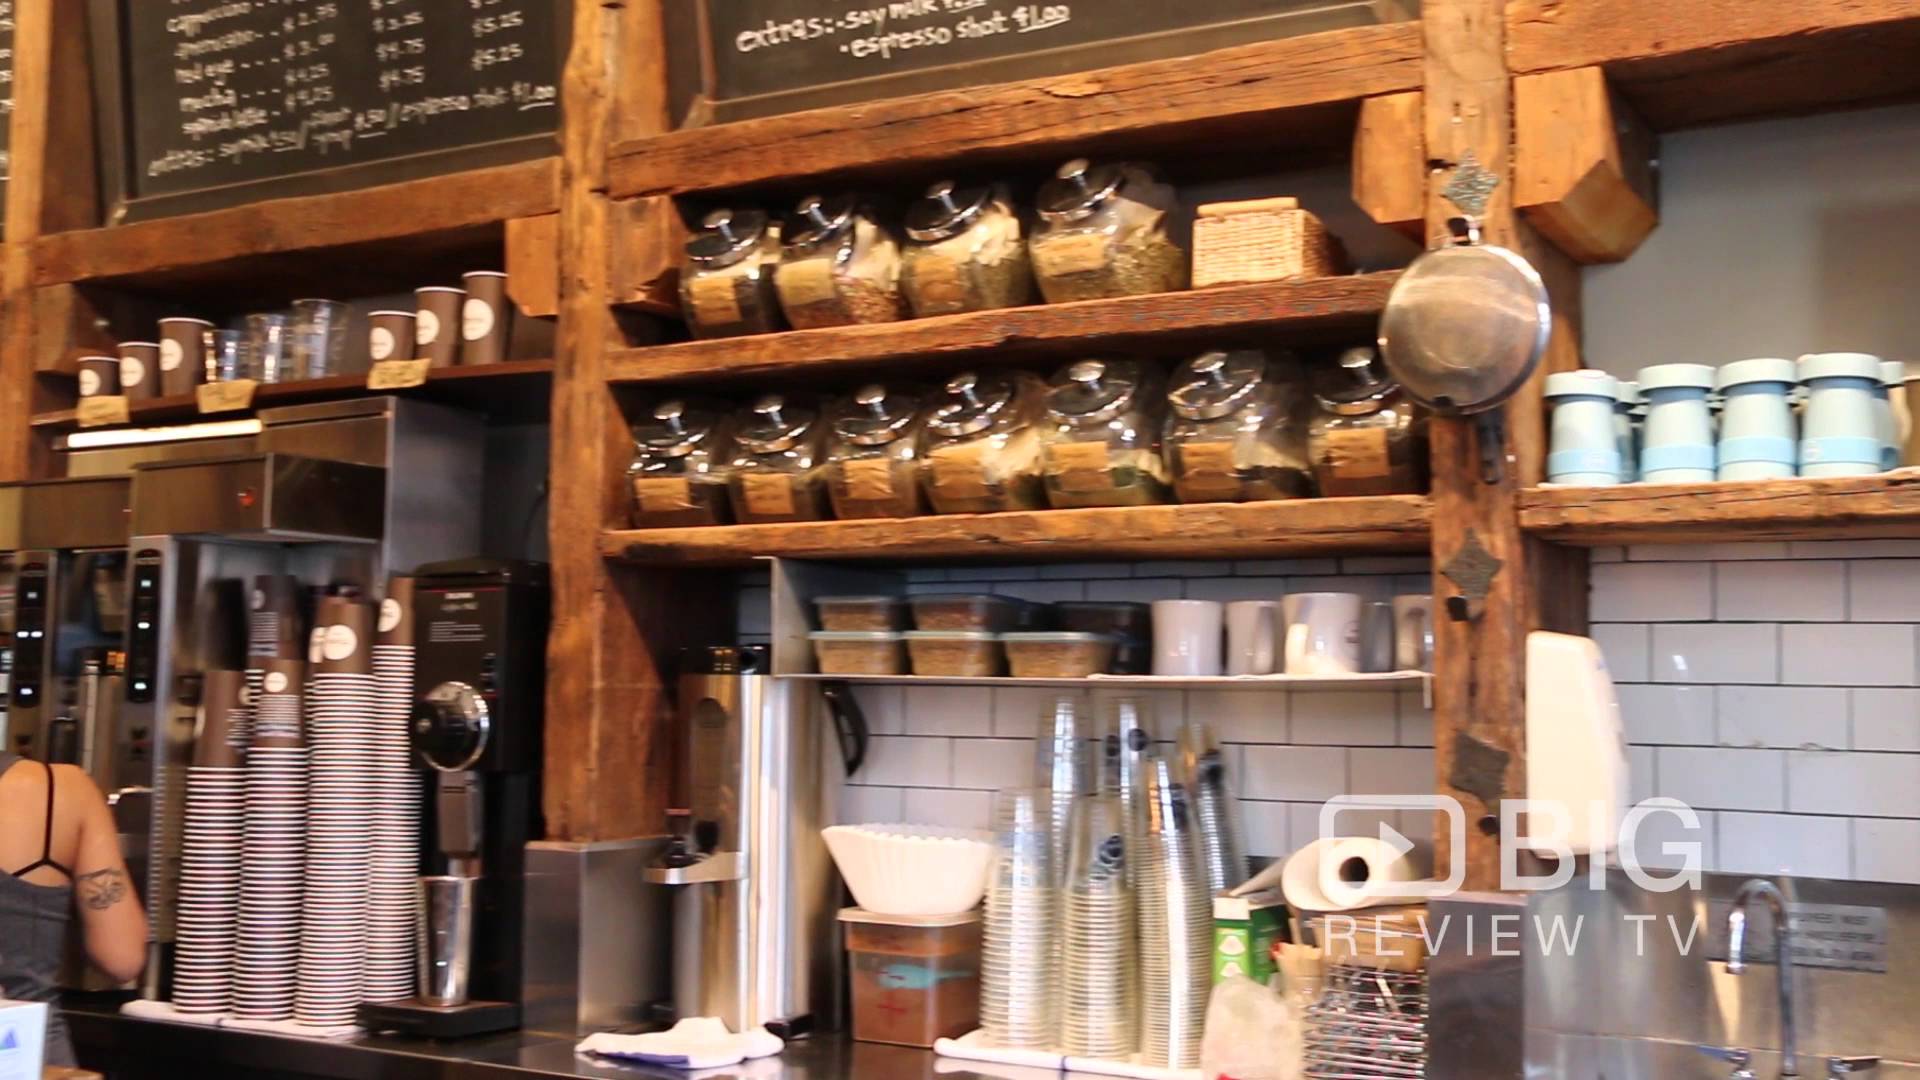 Think Coffee a Cafe in New York serving Coffee and Pastry - YouTube